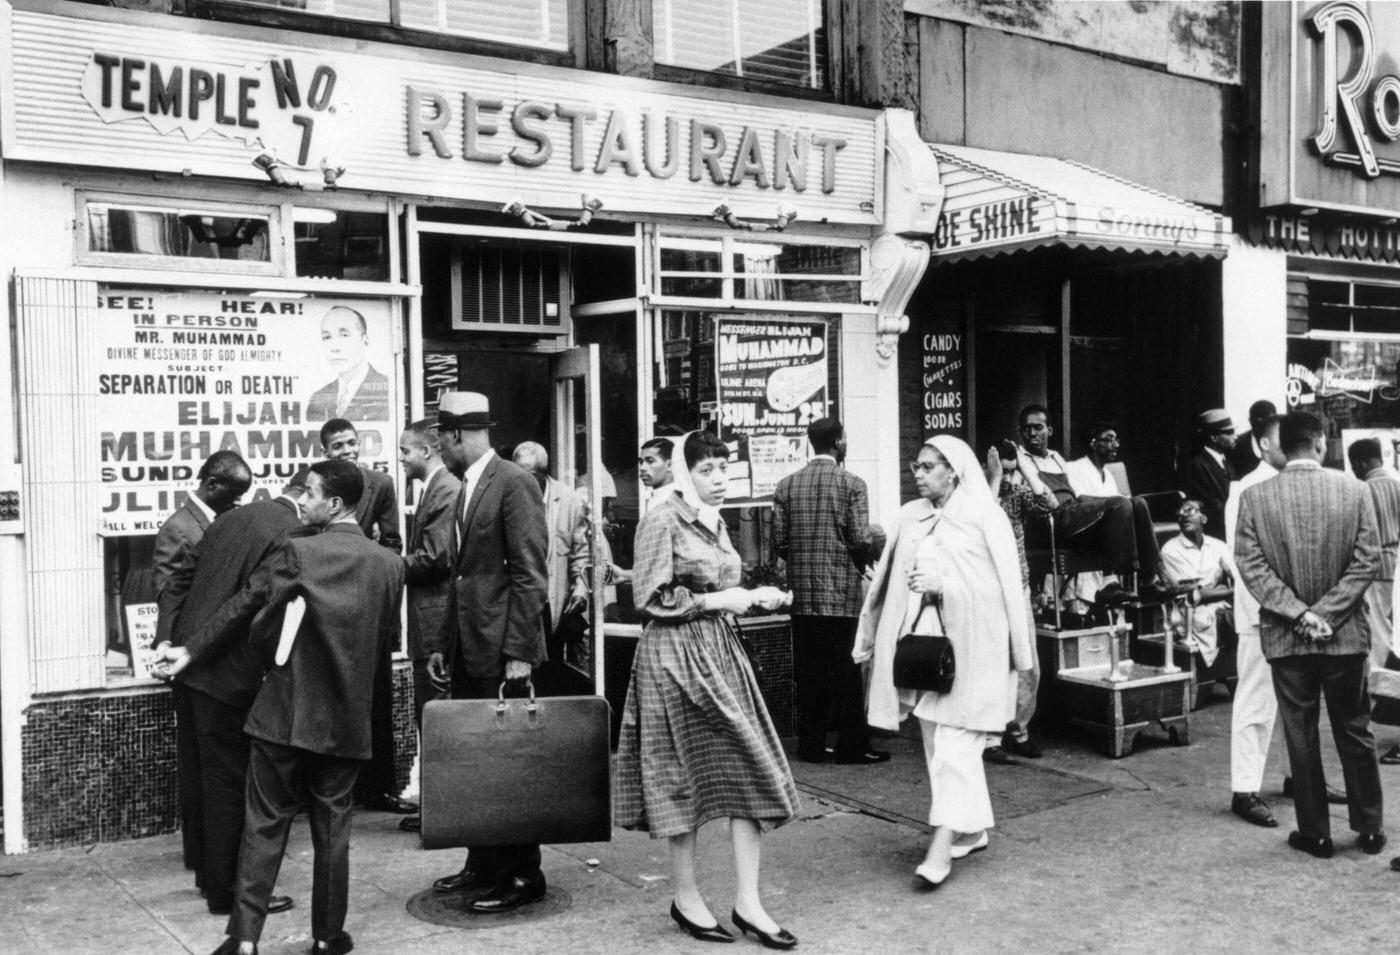 Temple No. 7 Restaurant Attached To The Nation Of Islam Temple, Harlem, Manhattan, 1961